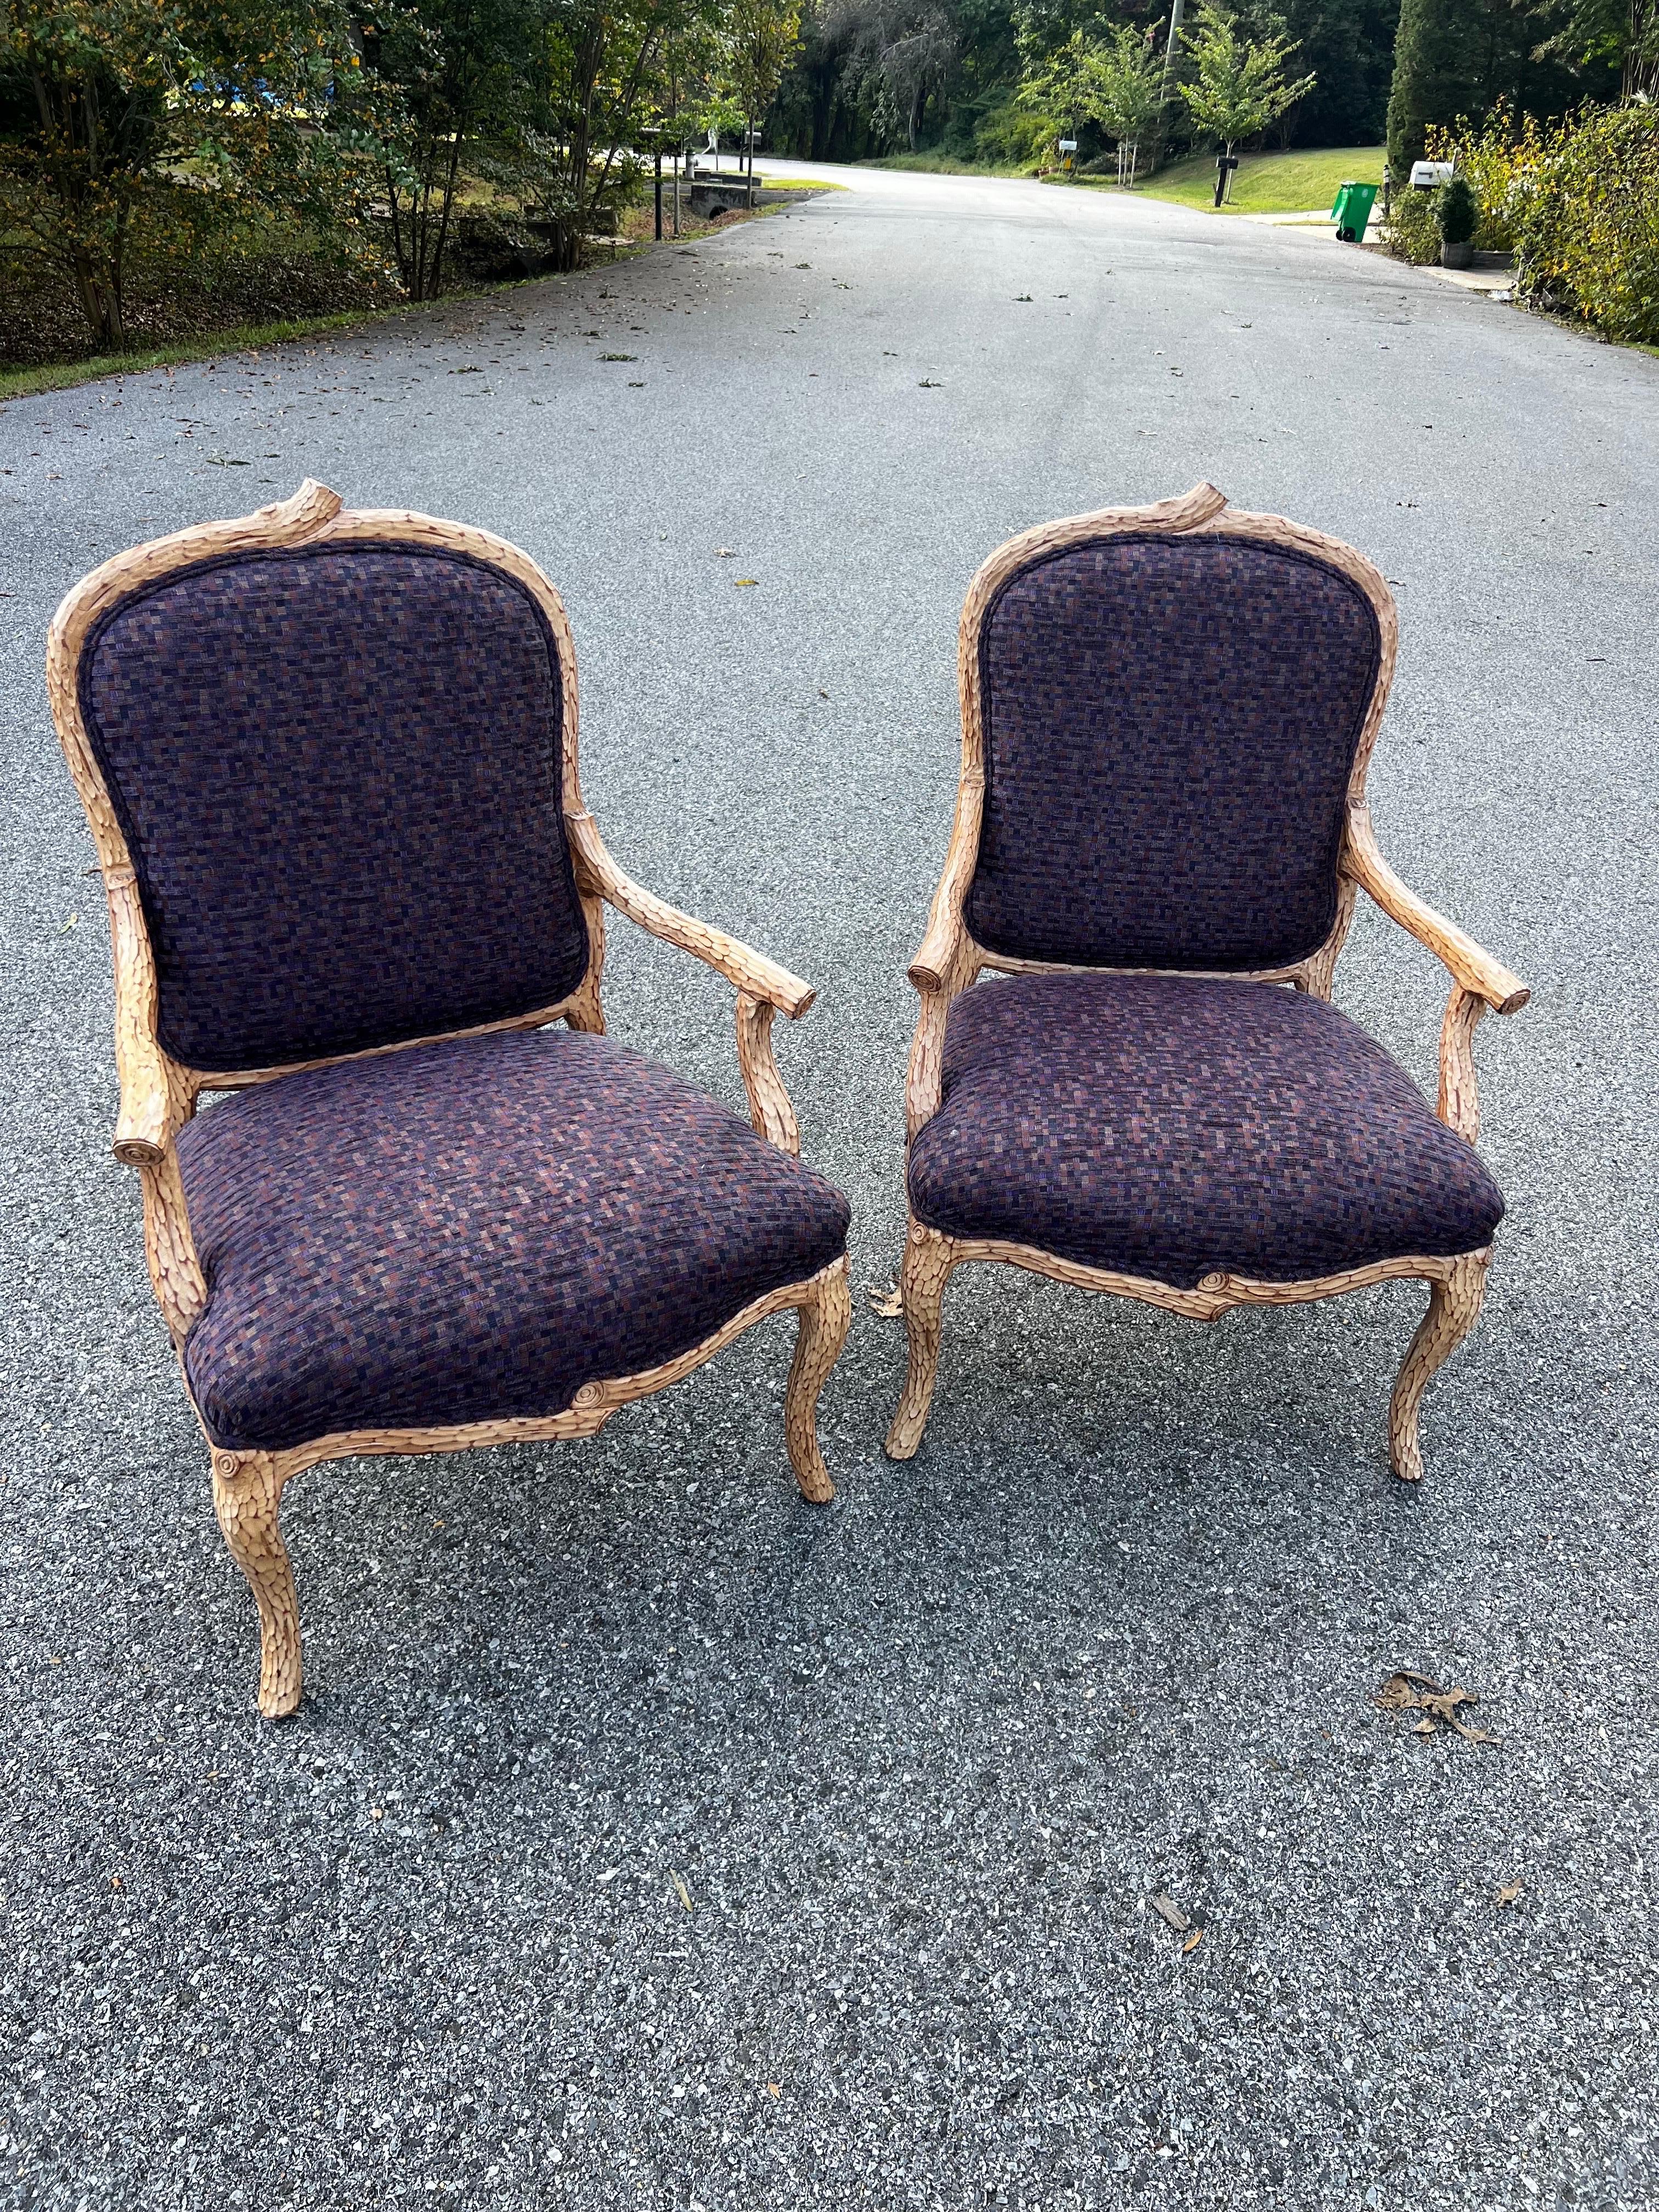 20th Century Faux Bois Louis XV Style Chairs In Purple - a Pair For Sale